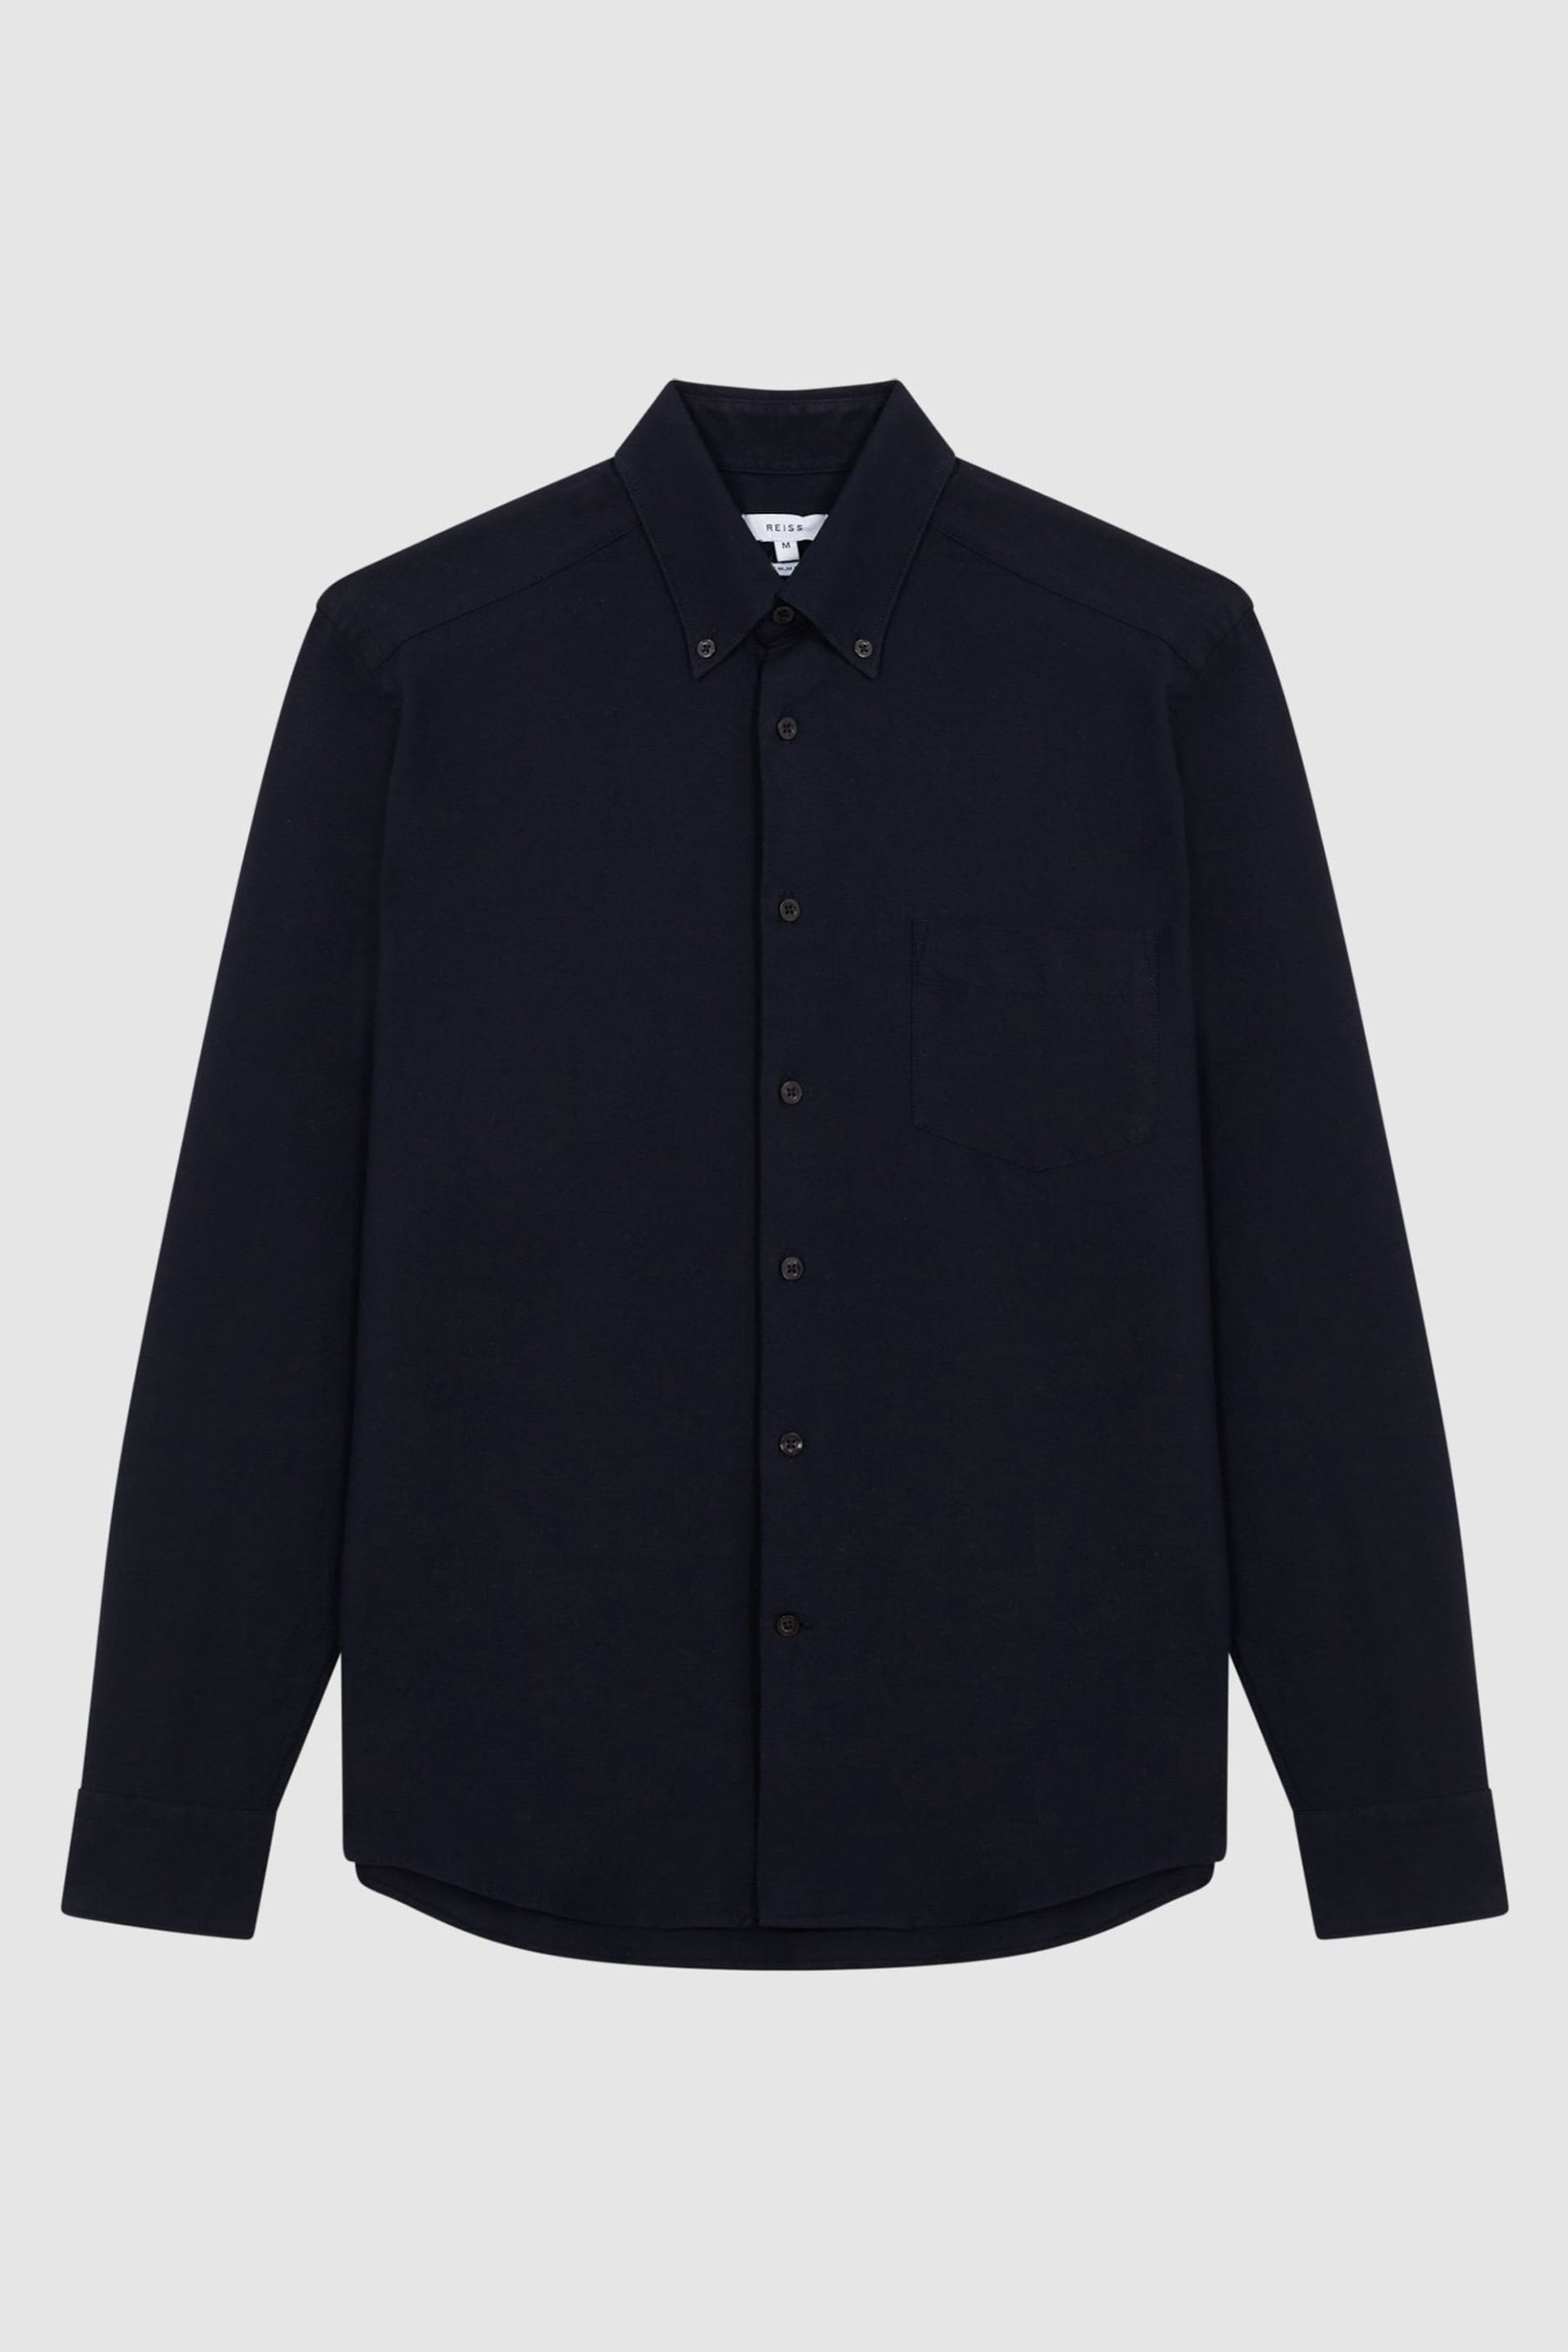 Reiss Navy Greenwich Slim Fit Cotton Oxford Shirt - Image 2 of 8